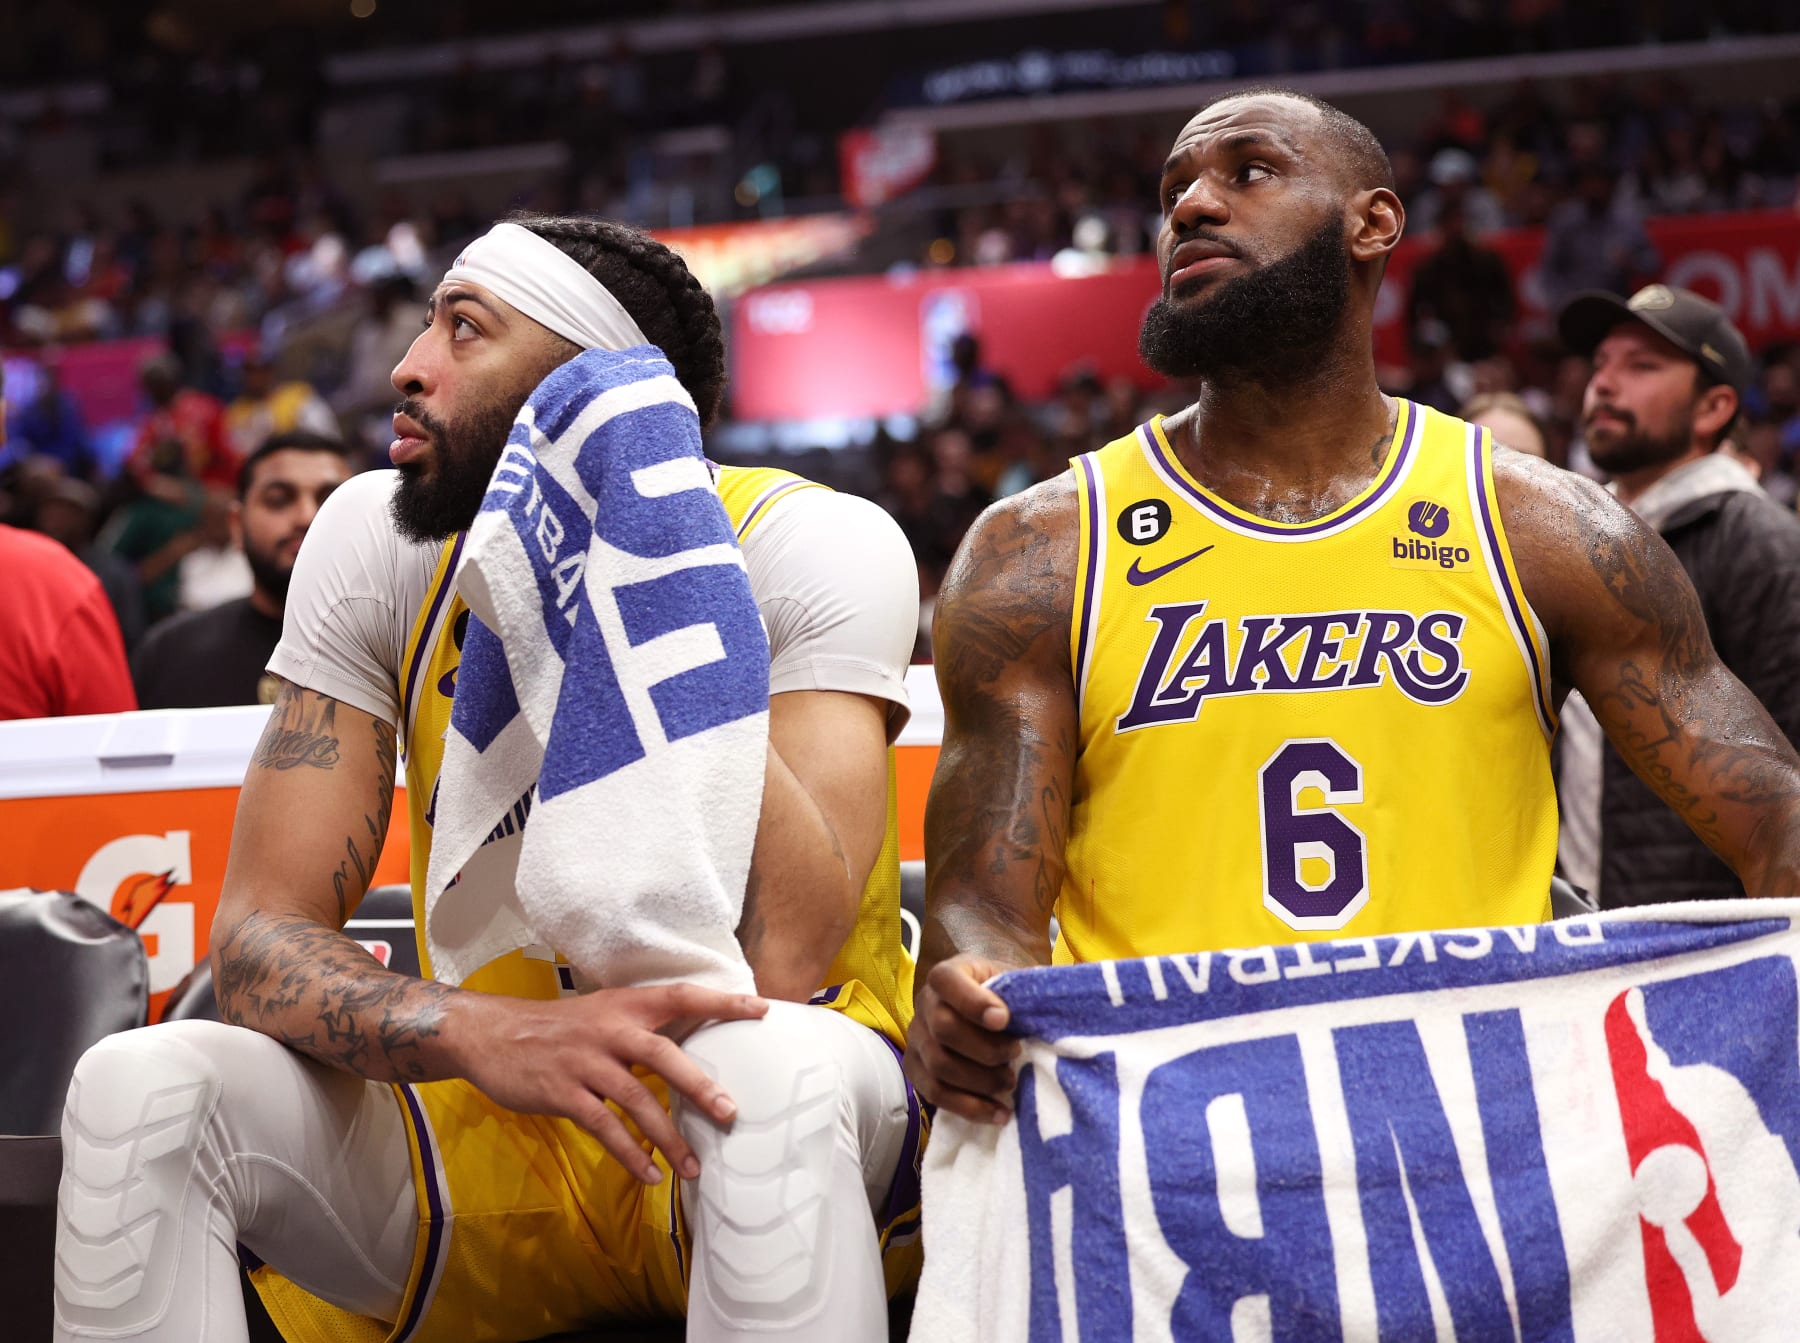 Lakers trade LeBron James back to Heat in this potential package